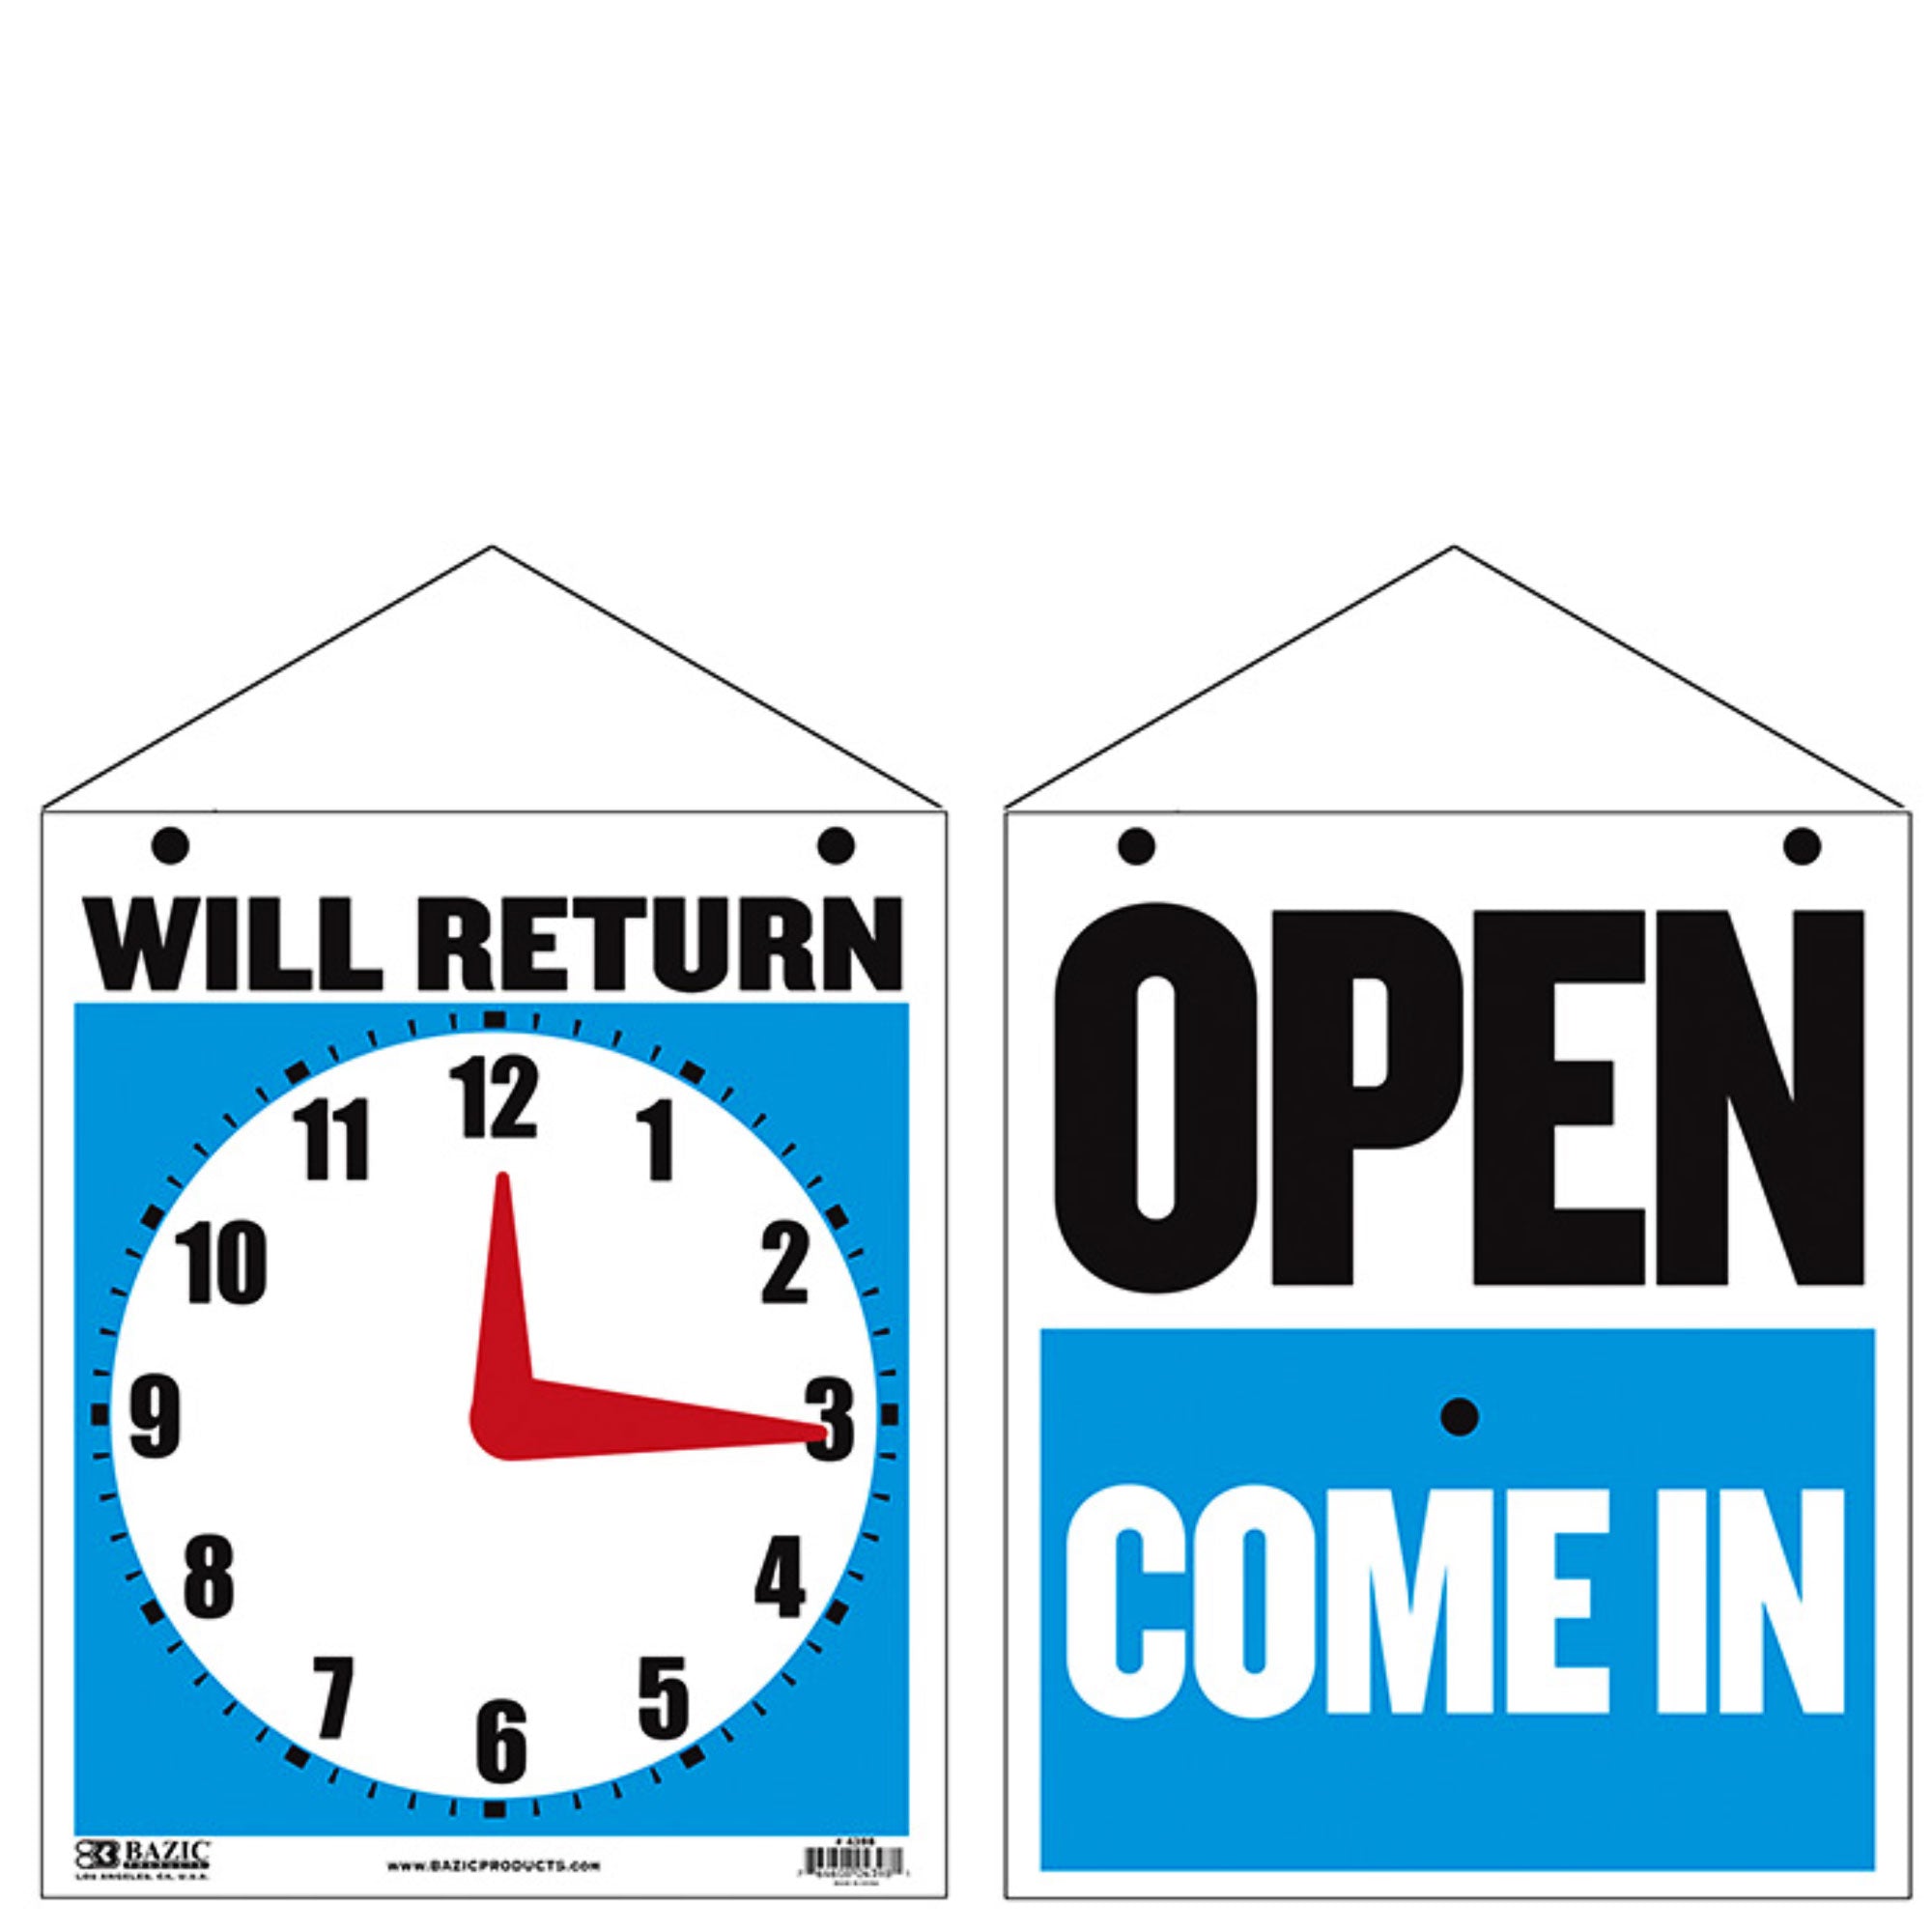 7.5" X 9" "WILL RETURN" Clock Sign w/ "OPEN" sign on back.